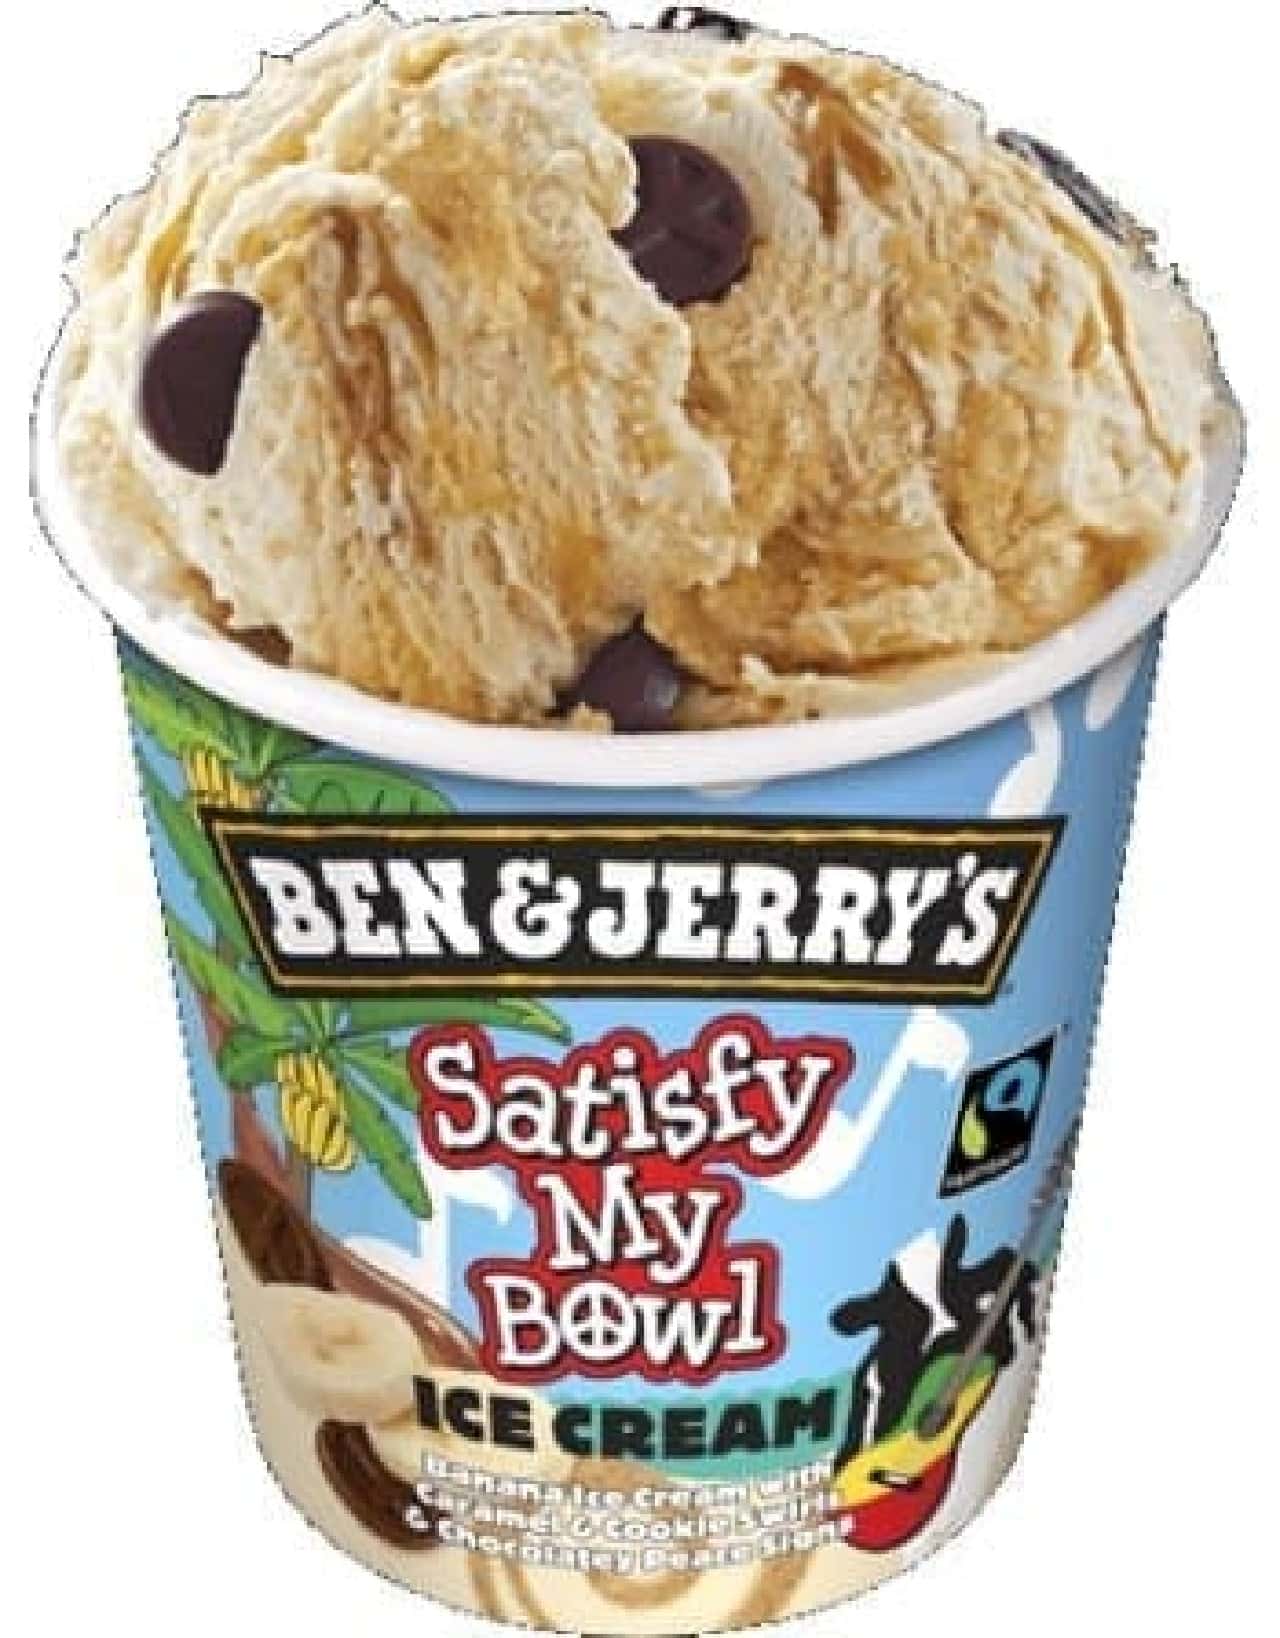 Ice cream full of "peace" (Source: BEN & JERRY'S official website in the UK)